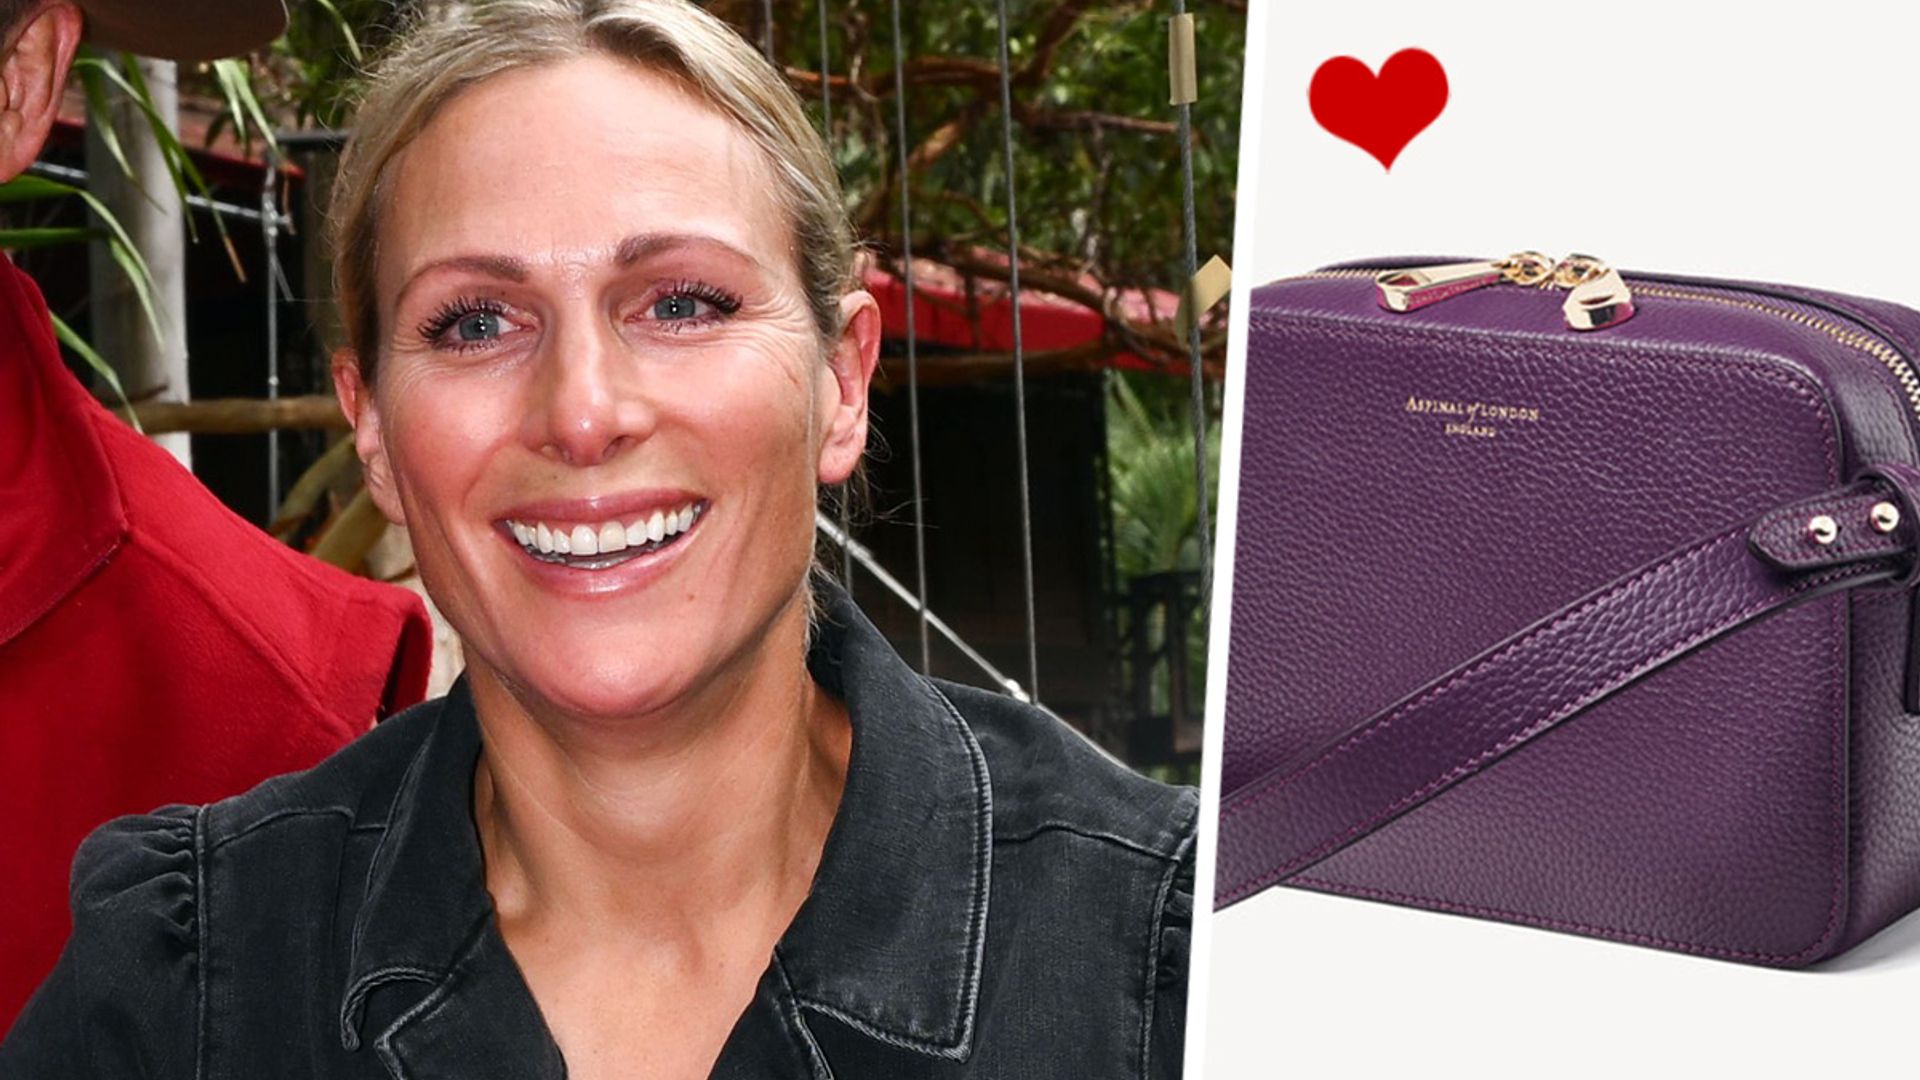 Zara Tindall loves the Aspinal of London crossbody camera bag - and it's 60% off in the sale